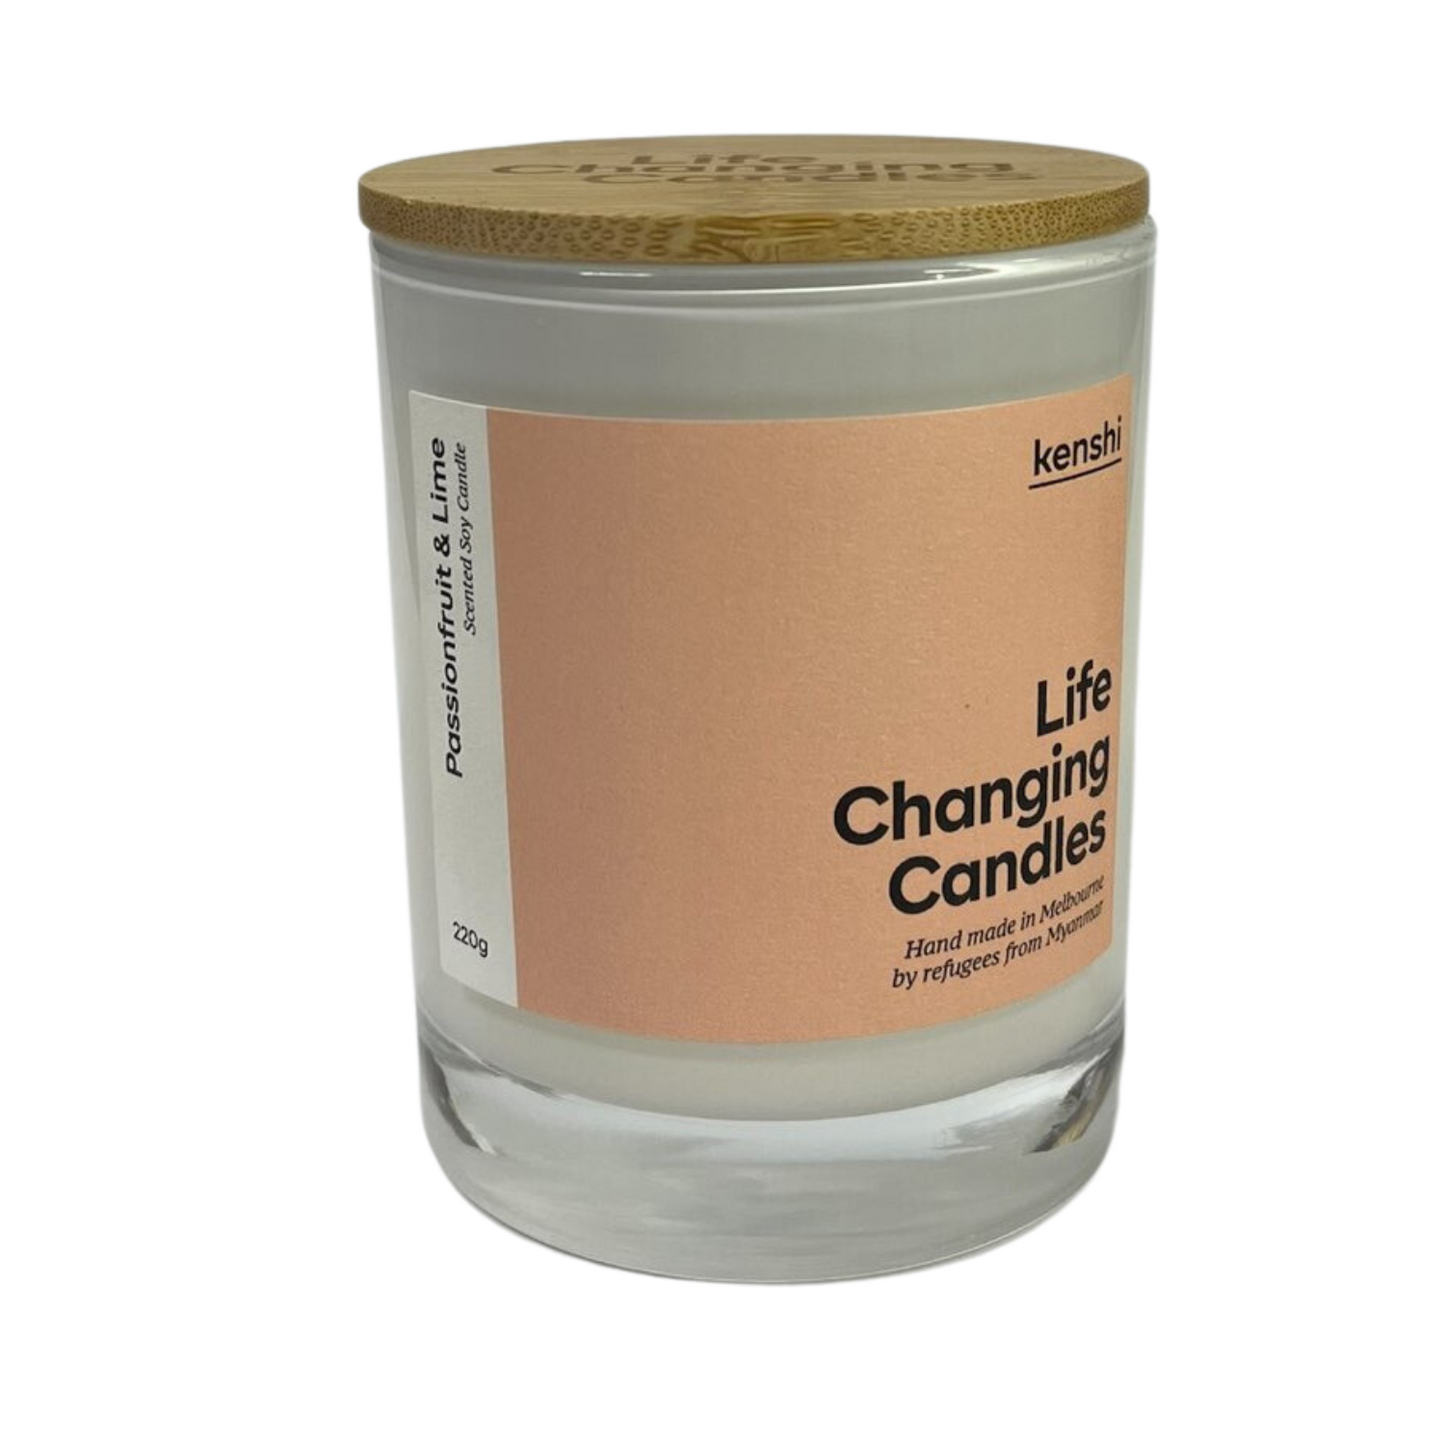 Mid size candle 220g